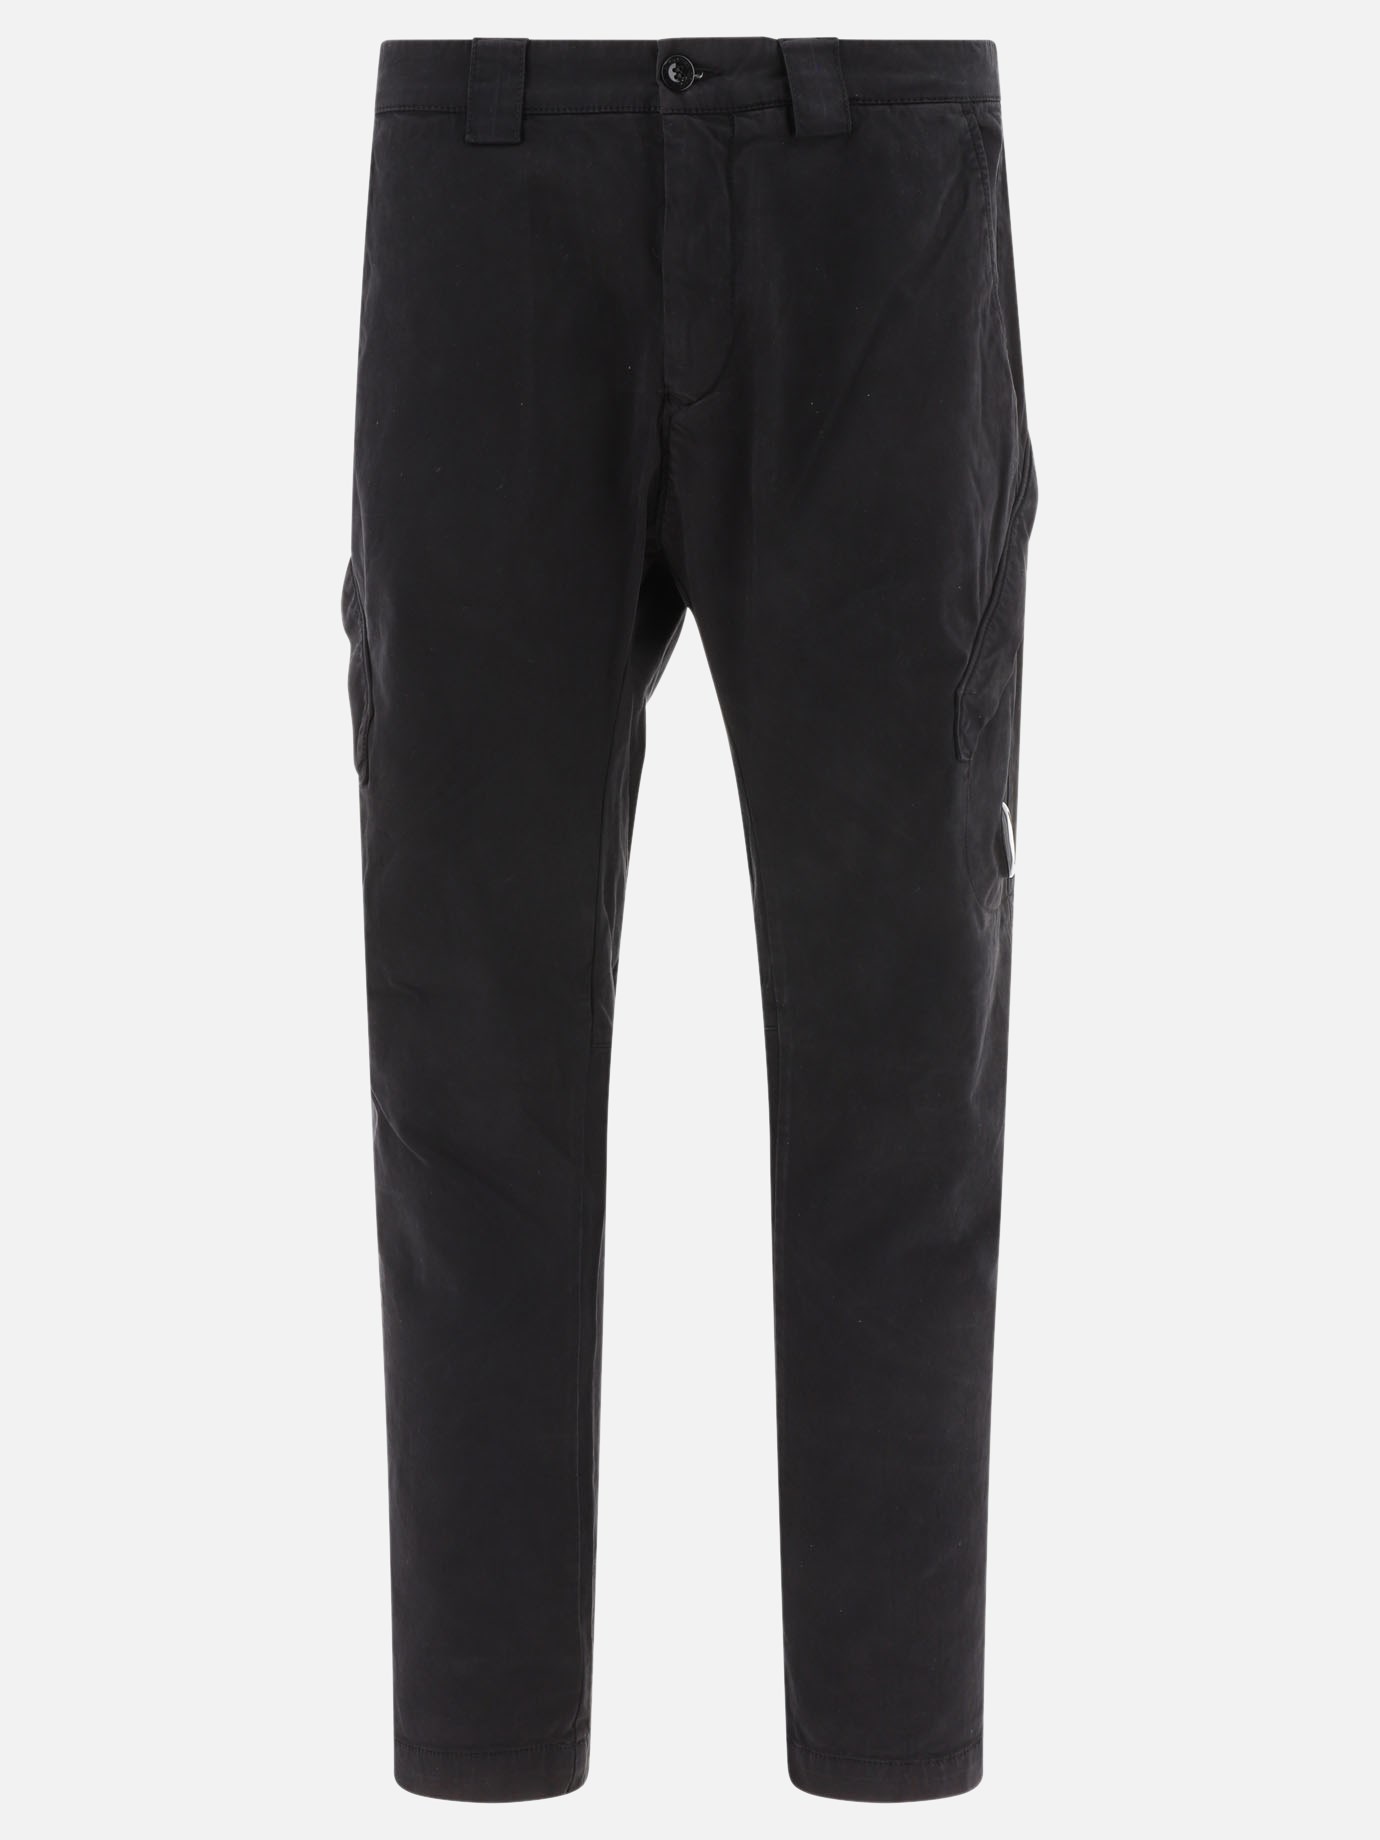  Sateen  cargo trousers by C.P. Company